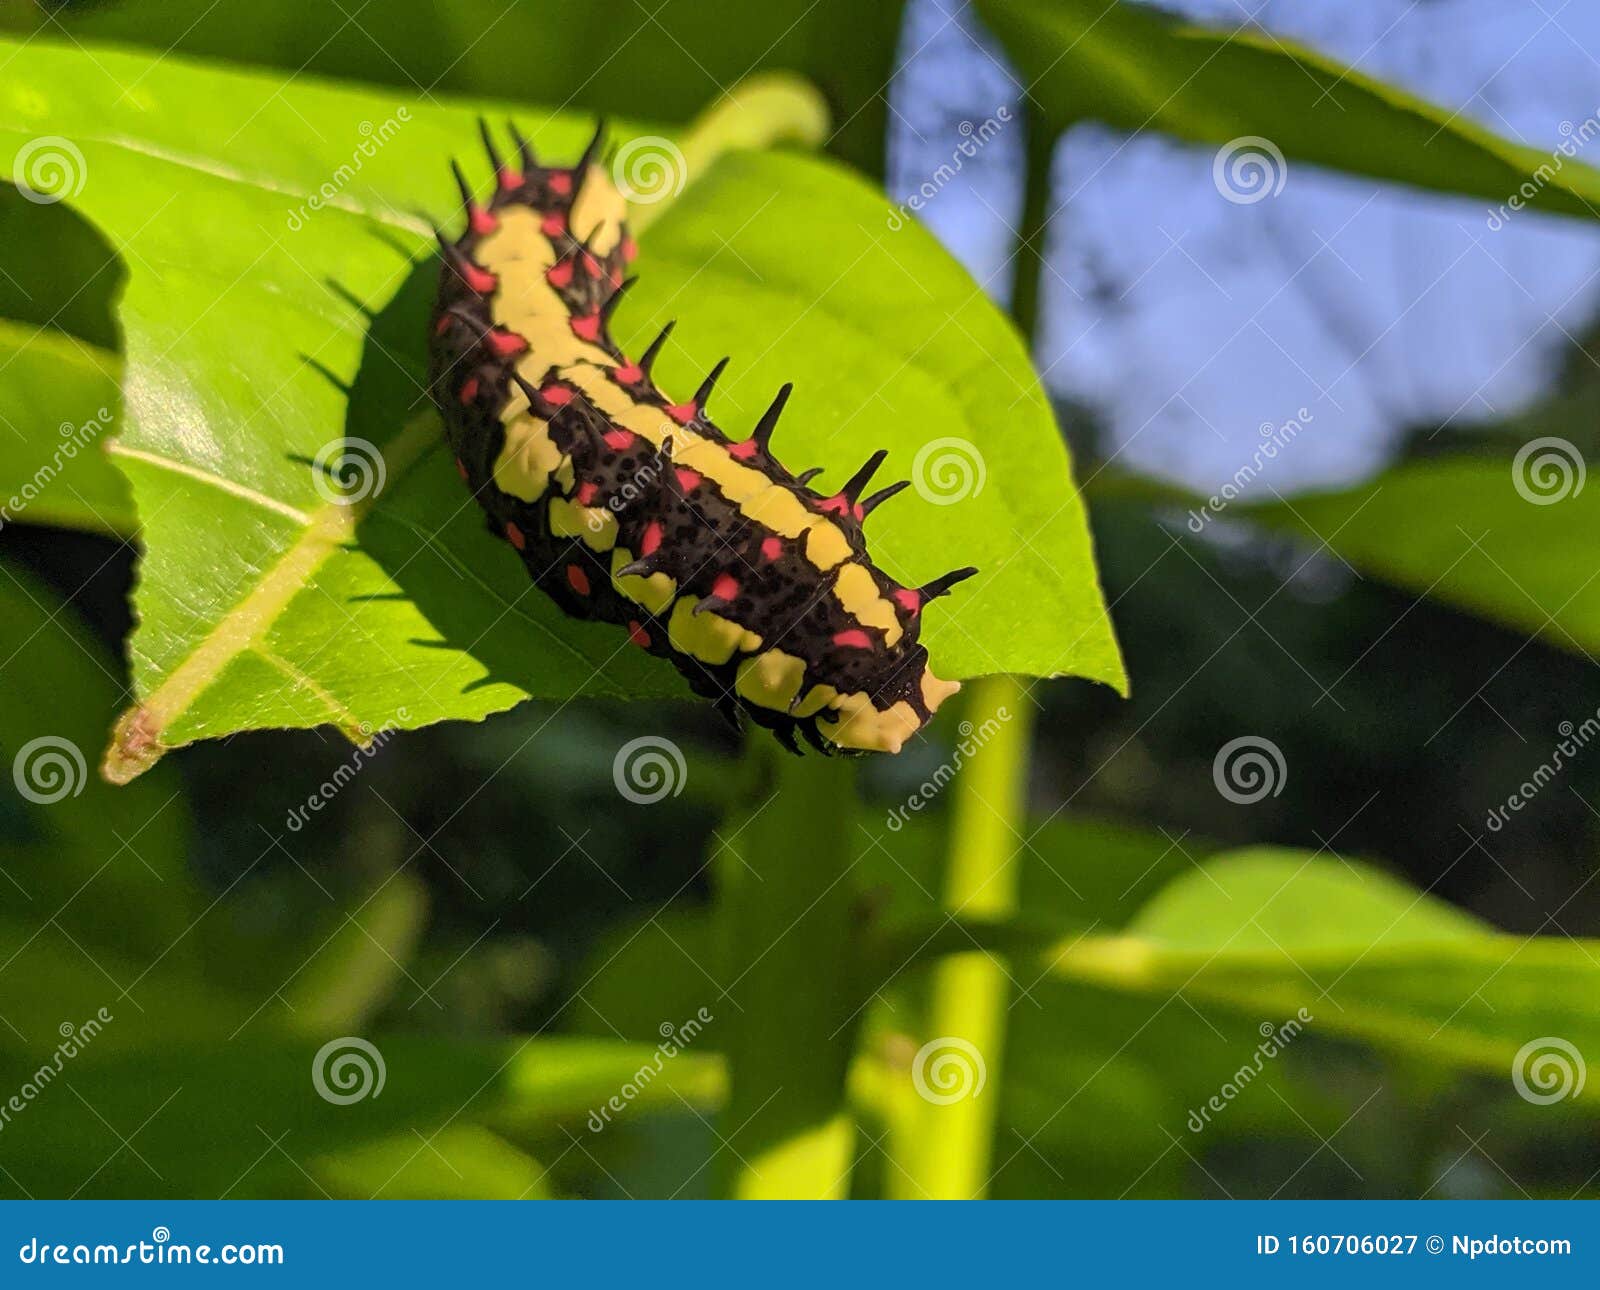 ba quiescent insect pupa  especially of a butterfly or moth in thailand